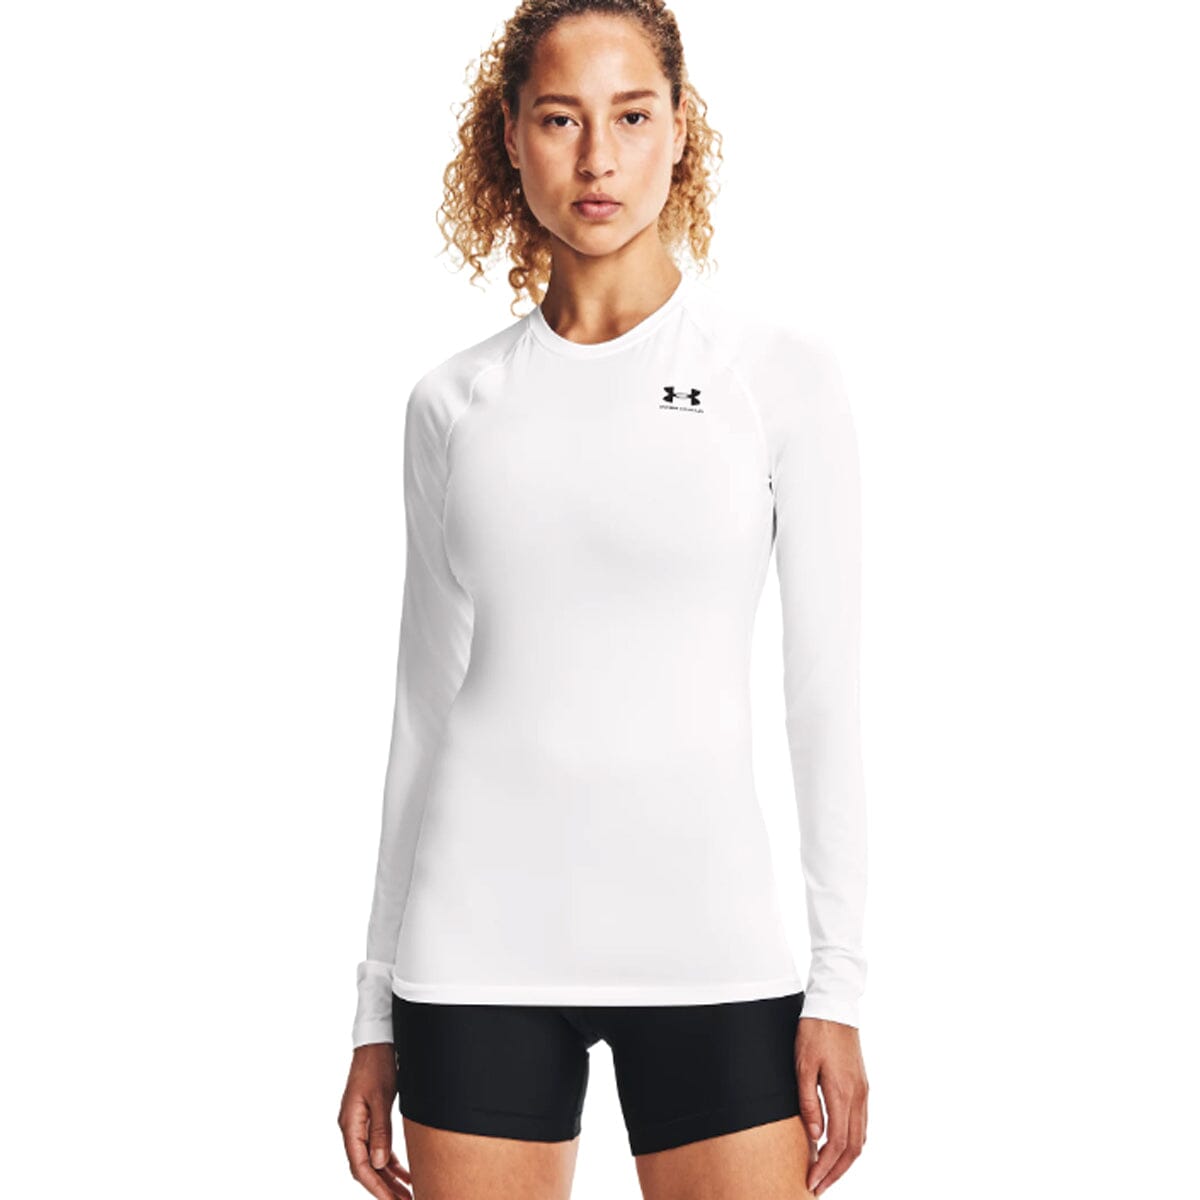 Under Armour Women's HeatGear® Compression Long Sleeve | 1365459 X-Small /  Black / White